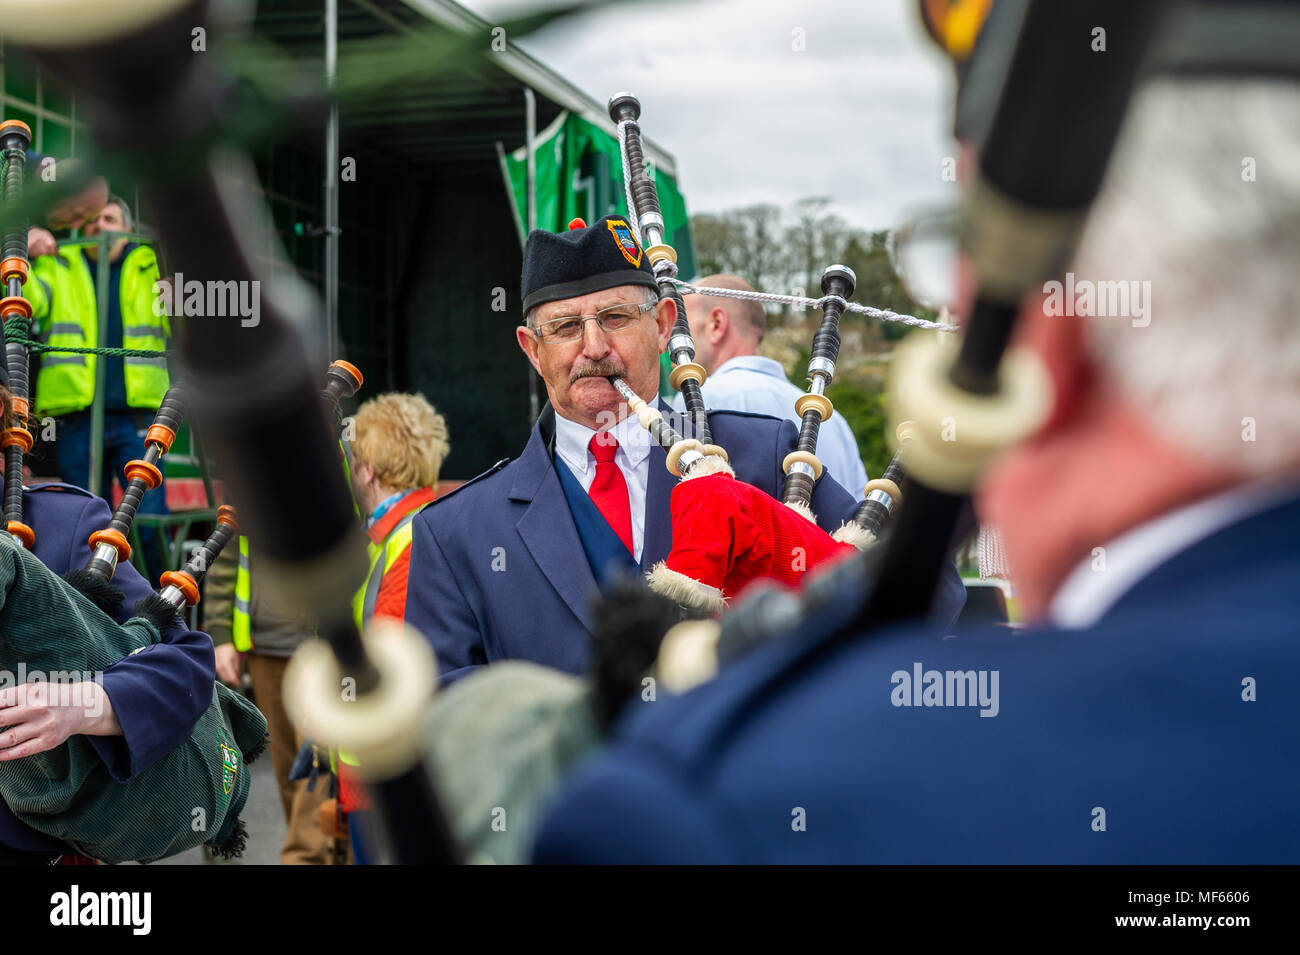 Bagpiper plays in a pipe band at a charity event in Bandon, County Cork, Ireland. Stock Photo